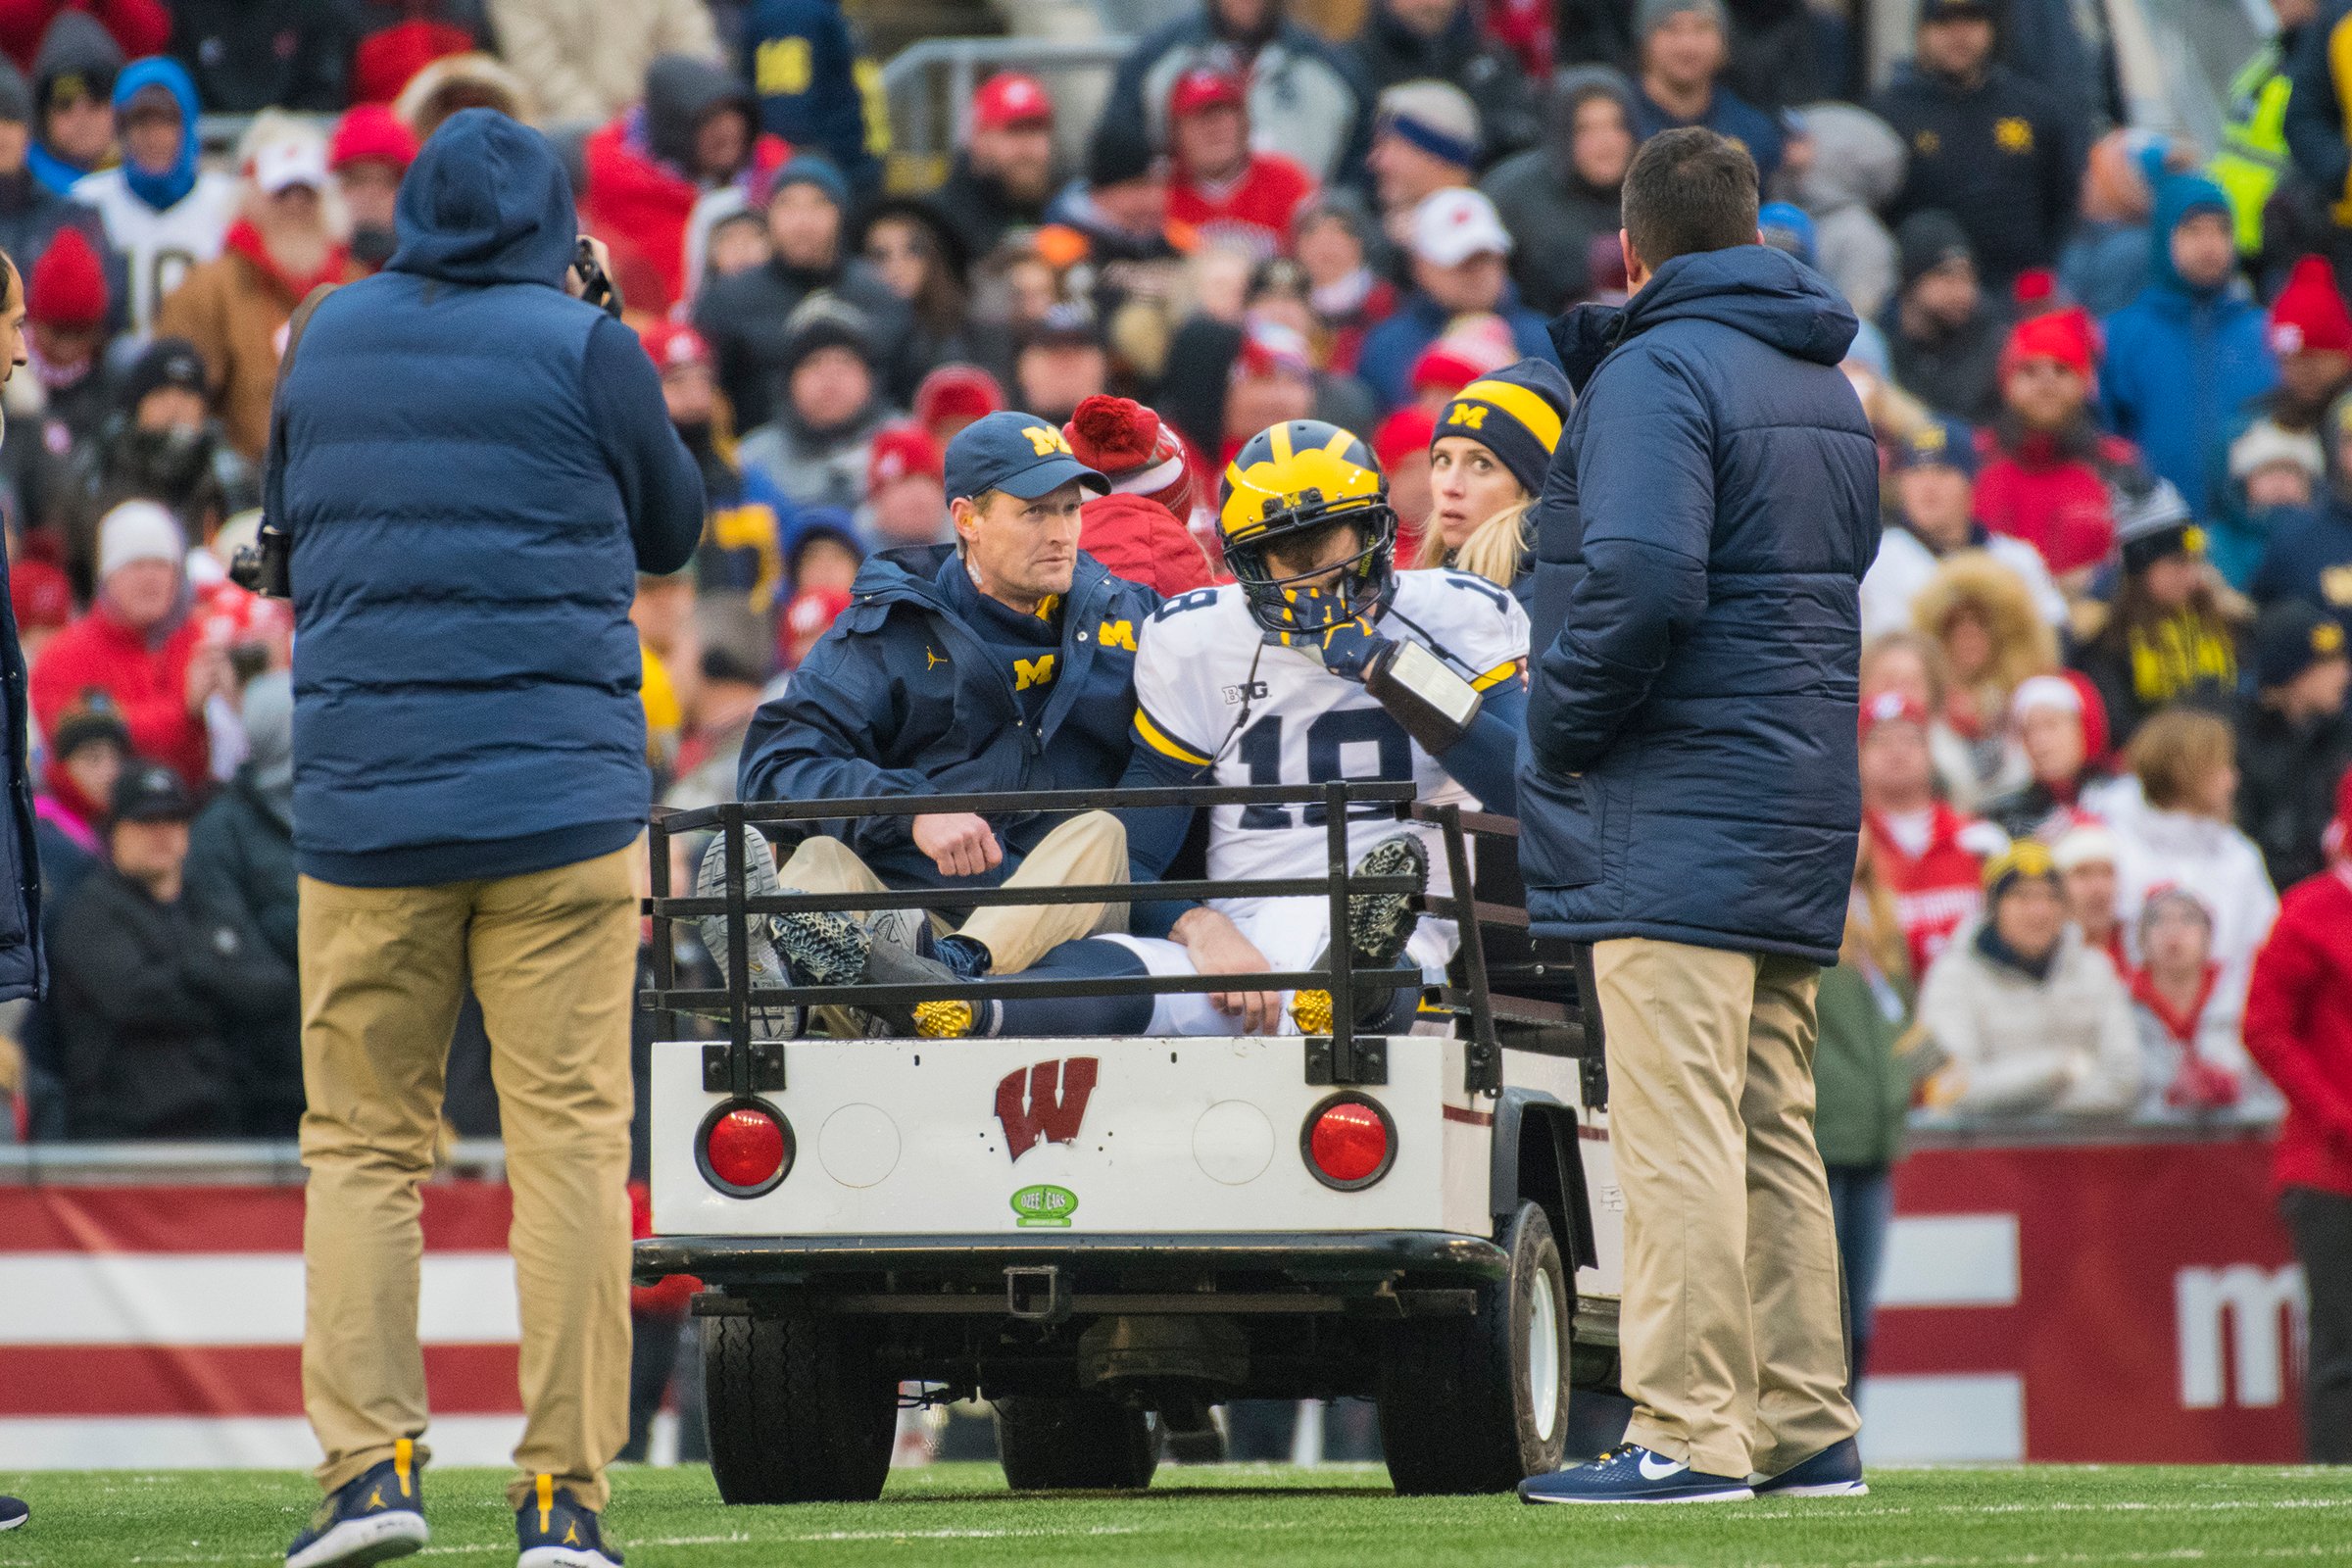 Big Ten Conference injury reports